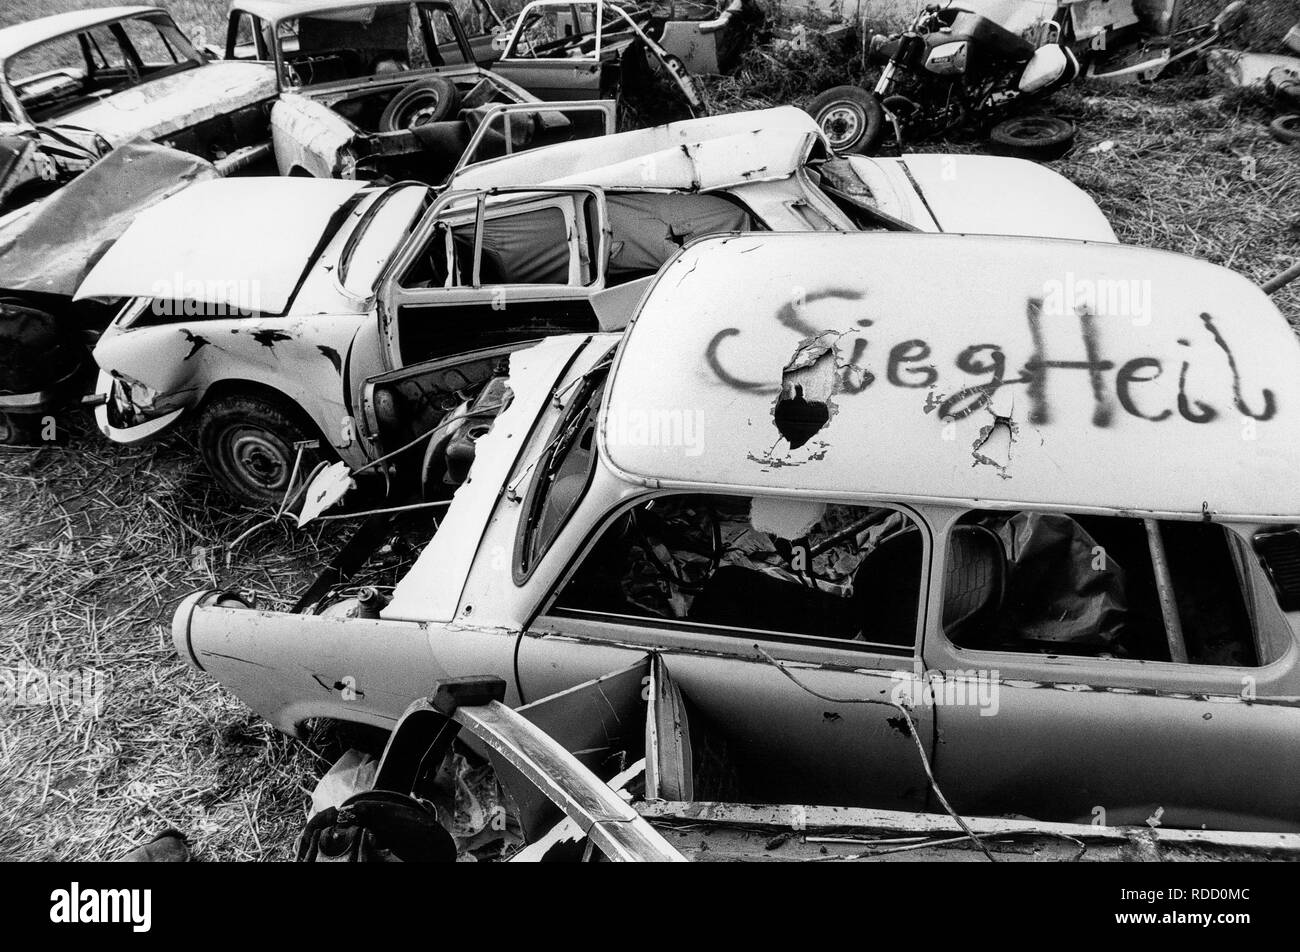 GERMANY in 1990 after reunification, former East Germany, German Democratic Republic GDR, typical plastic car Trabant also called Trabbi with fascist Nazi Hitler greeting Sieg Heil and Wartburg car on wild dumping site in village Plauerhagen, Mecklenburg, people have dumped their East German car in exchange to new western cars, scan from black and white negative with film grain Stock Photo